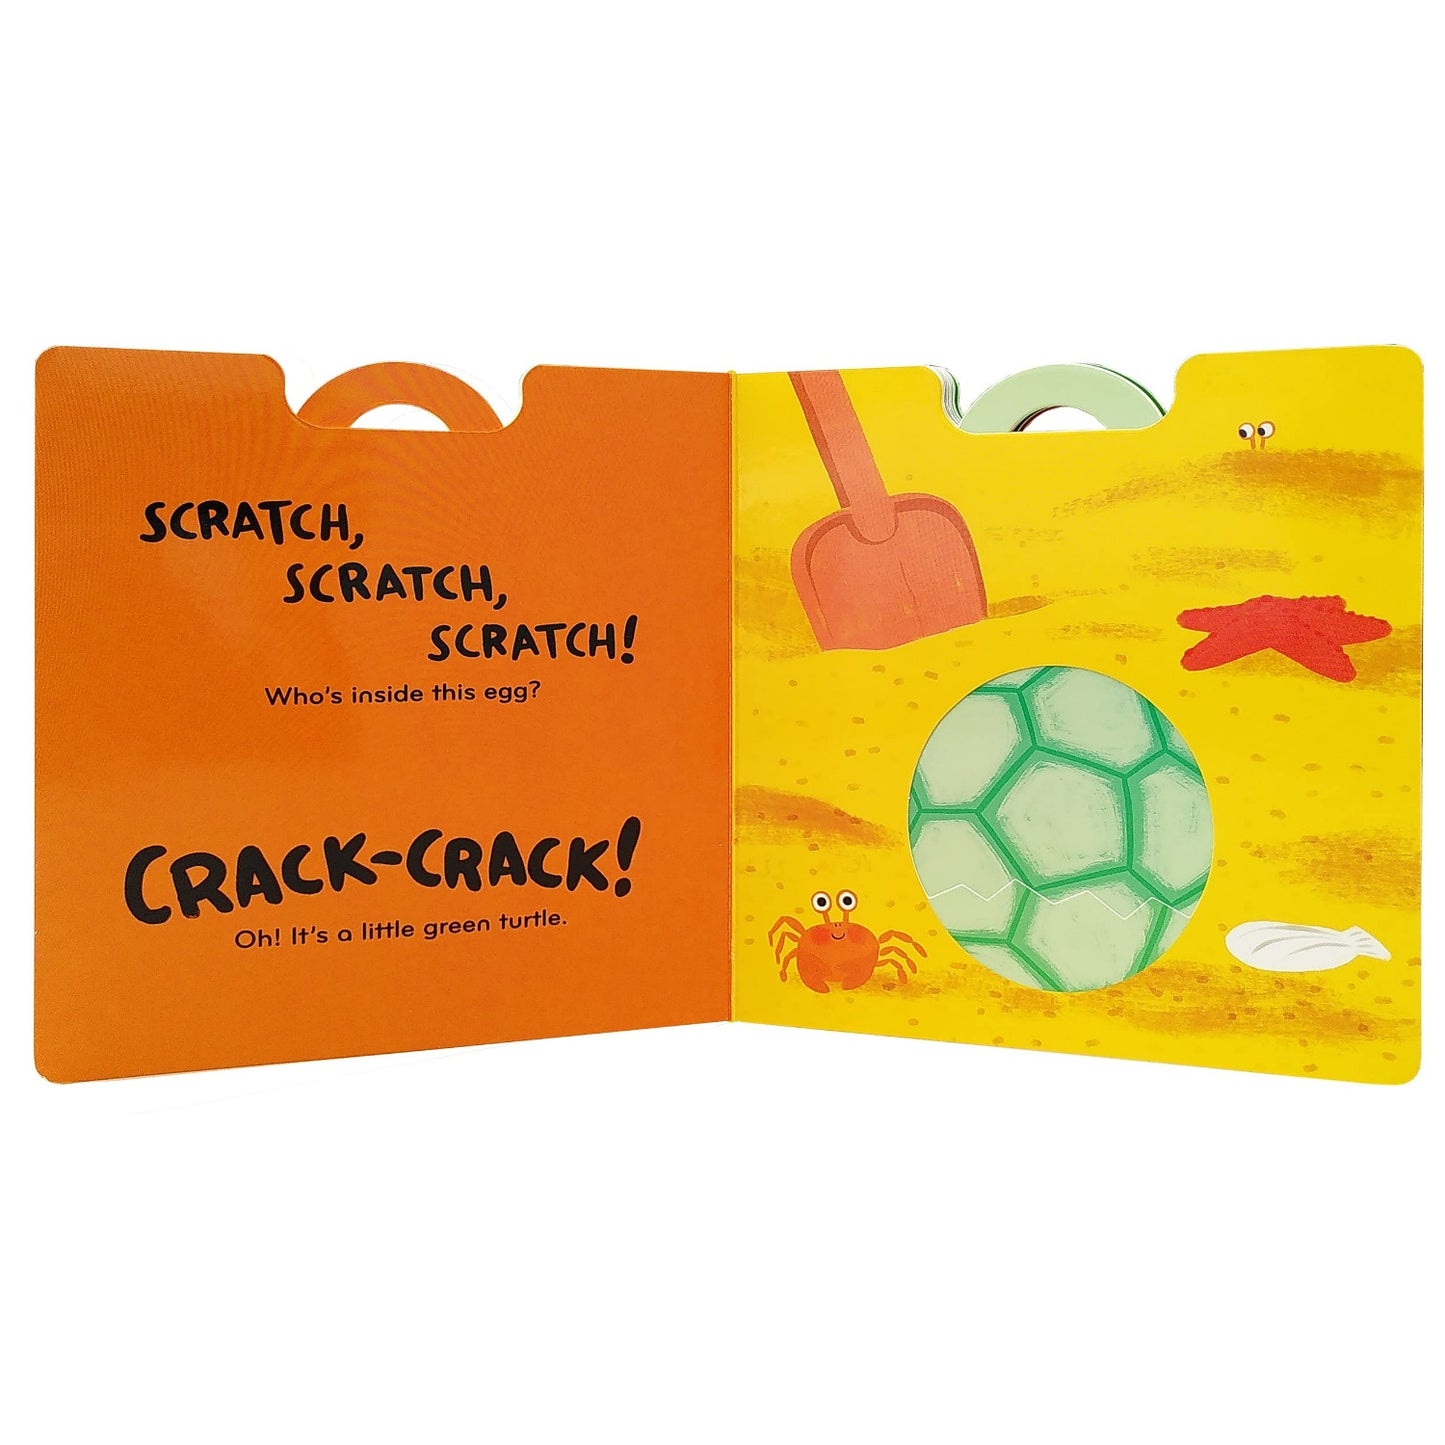 Crack-Crack! Who's That? | Interactive Board Book for Babies & Toddlers